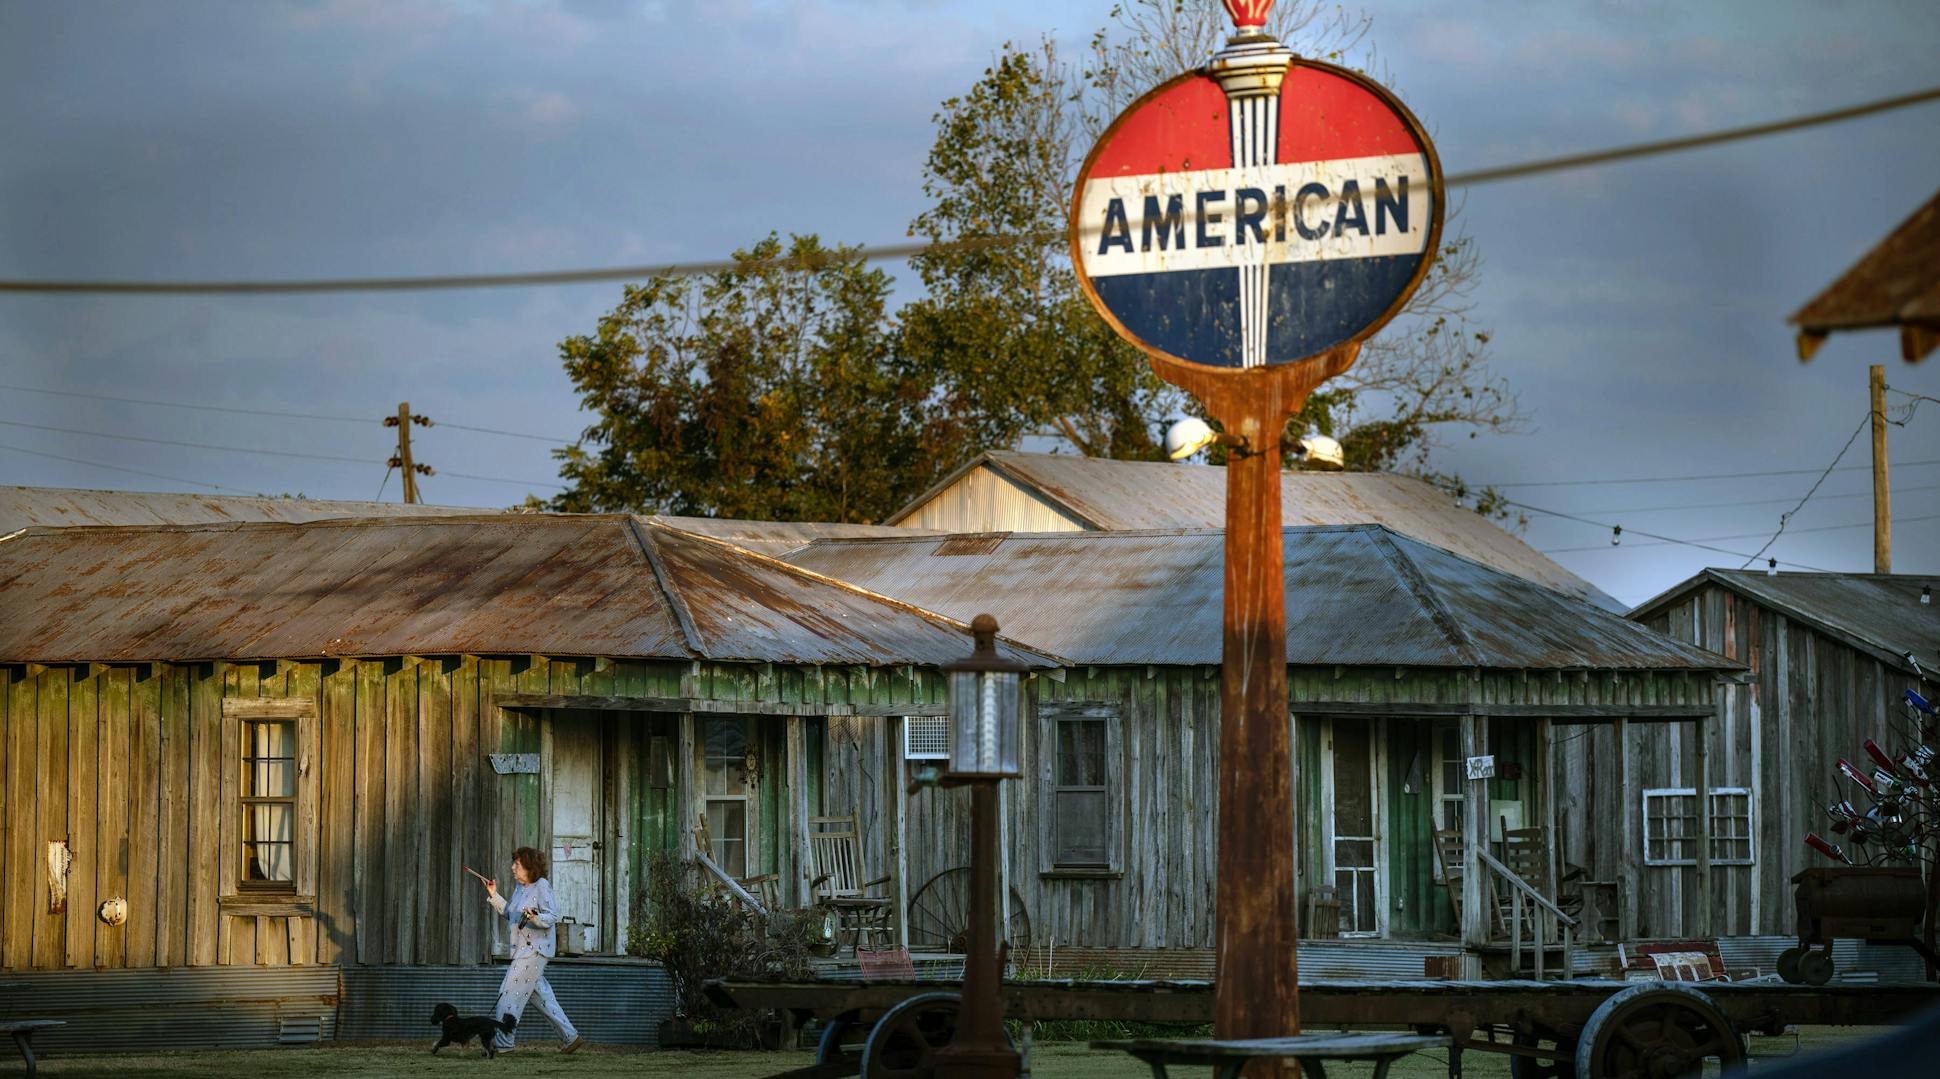 For one of the world's most unusual motels, Clarksdale's Shack Up Inn collected shotgun shacks from plantations, adding modern amenities and vintage furnishings.